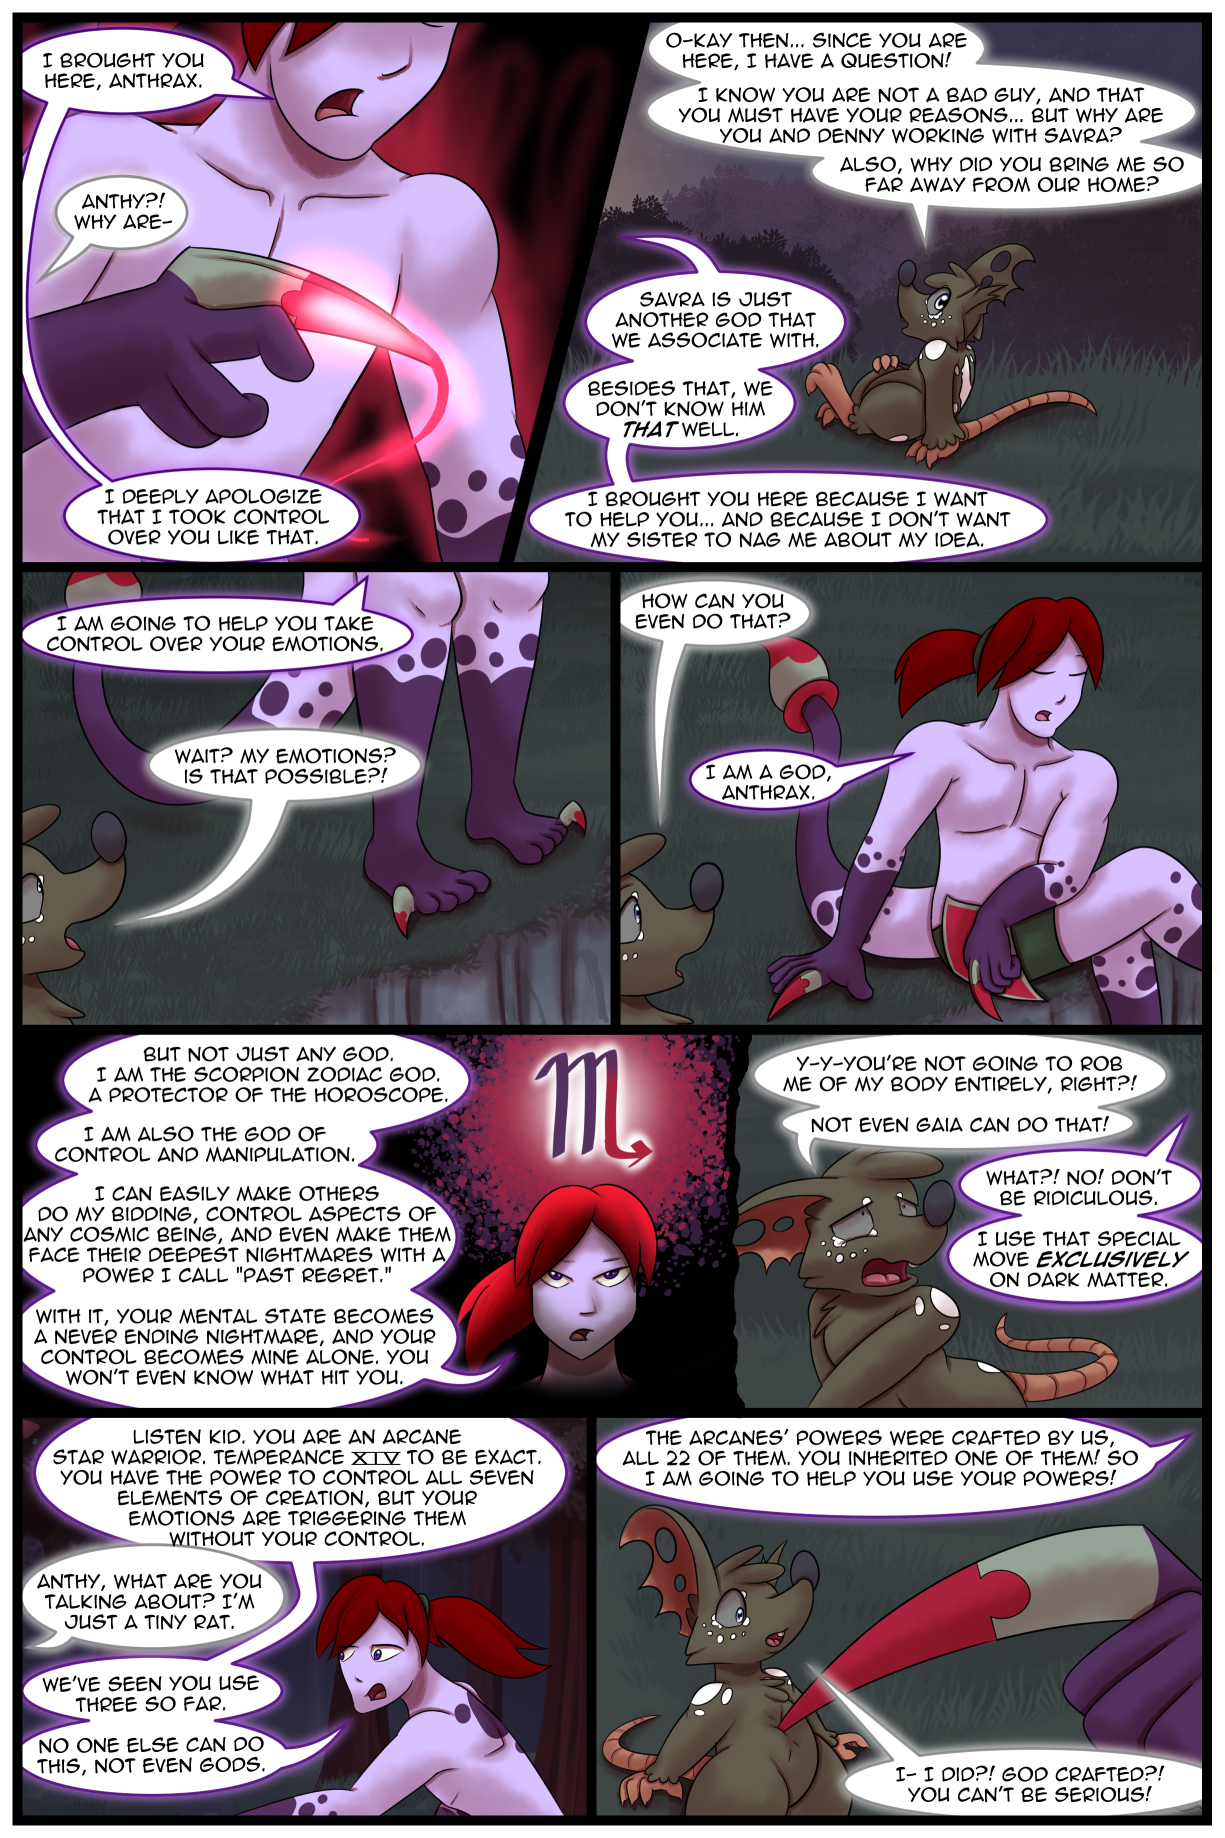 Ch5 Page 48 – Control